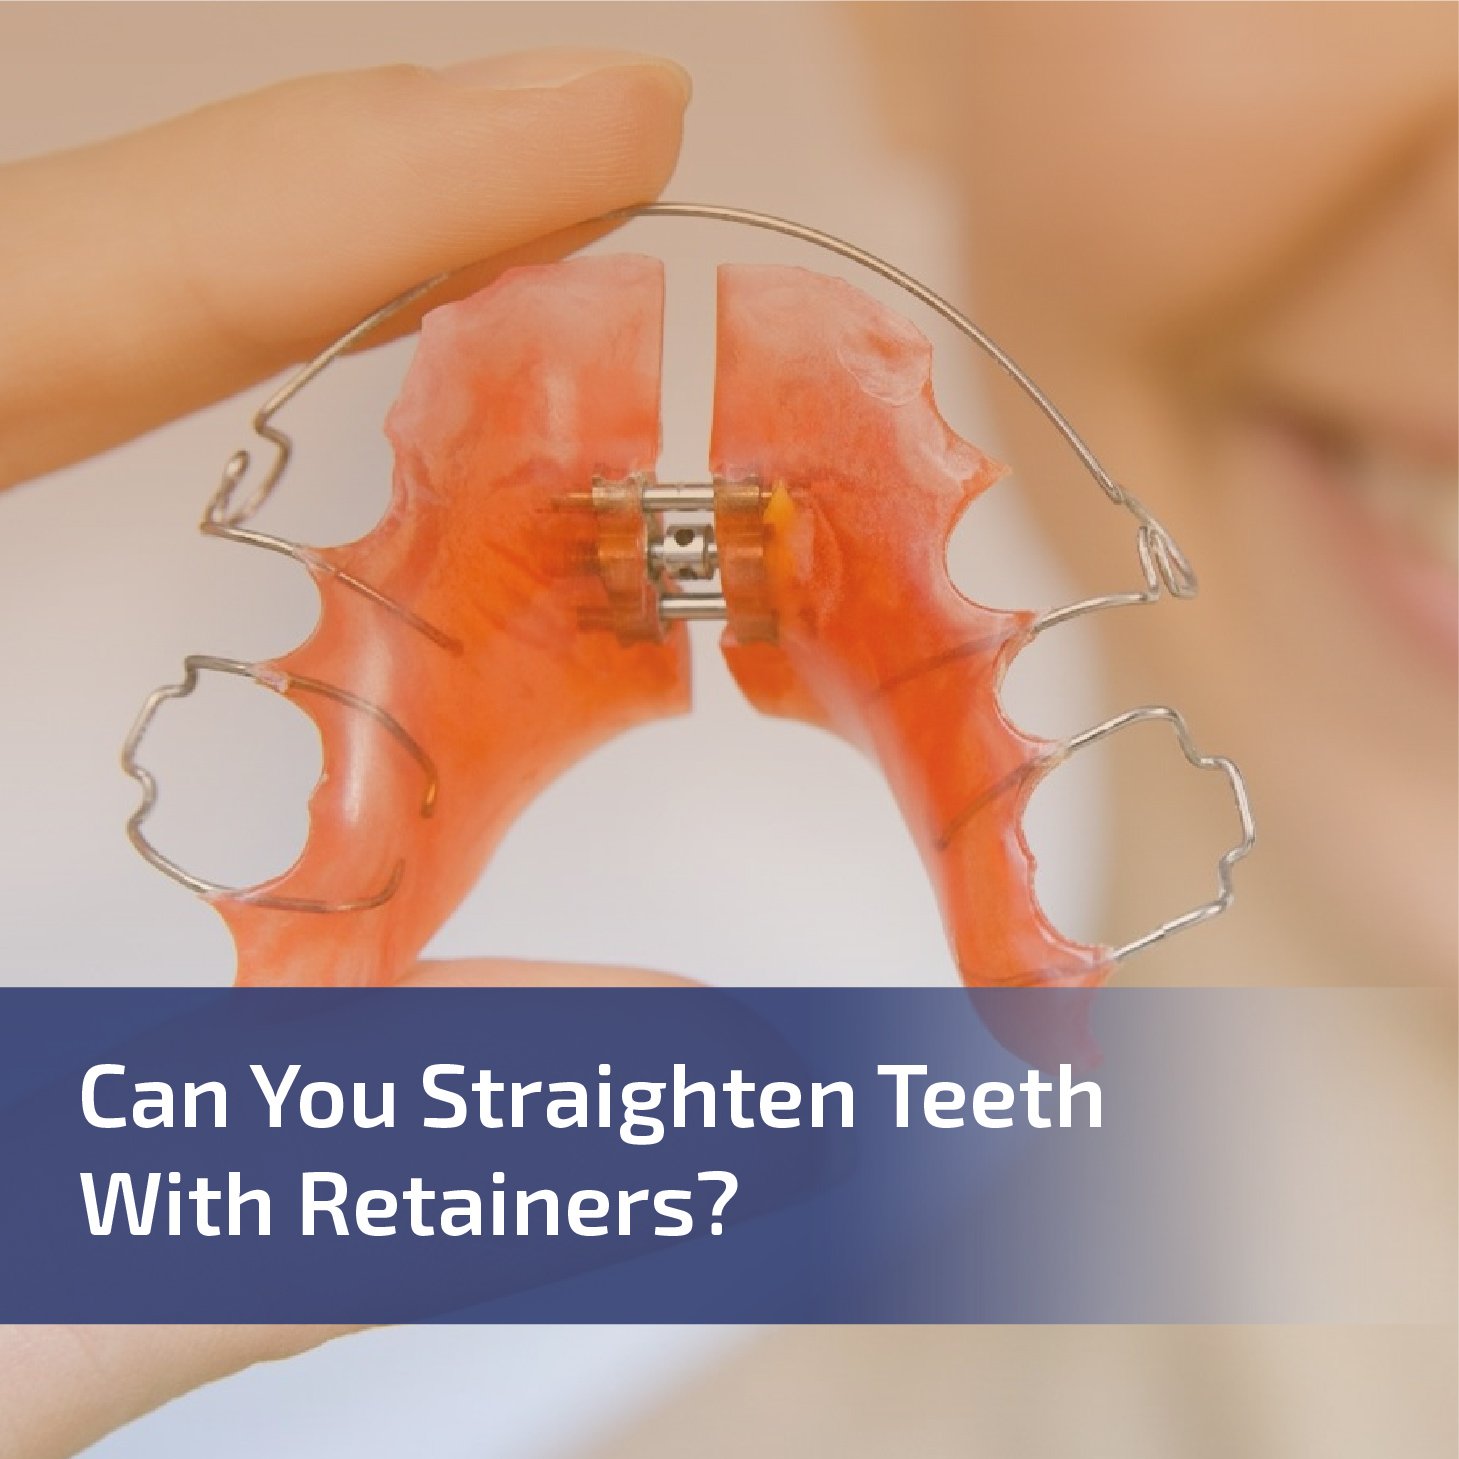 Can You Straighten Teeth with Retainers?